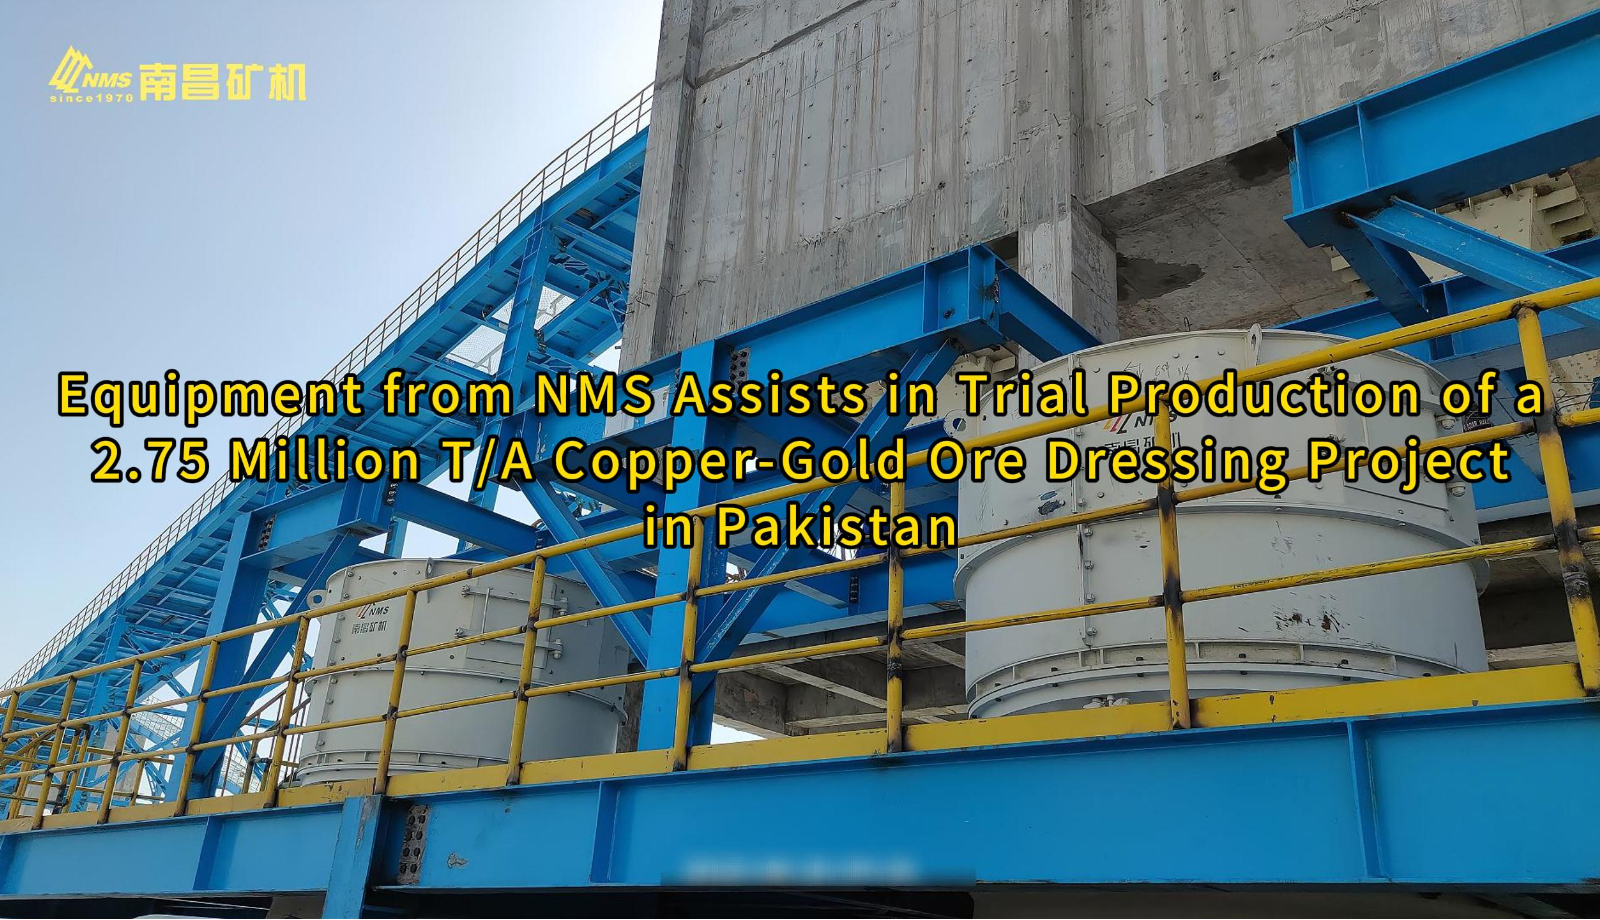 Equipment from NMS Assists in Trial Production of a 2.75 Million T/A Copper-Gold Ore Dressing Project in Pakistan